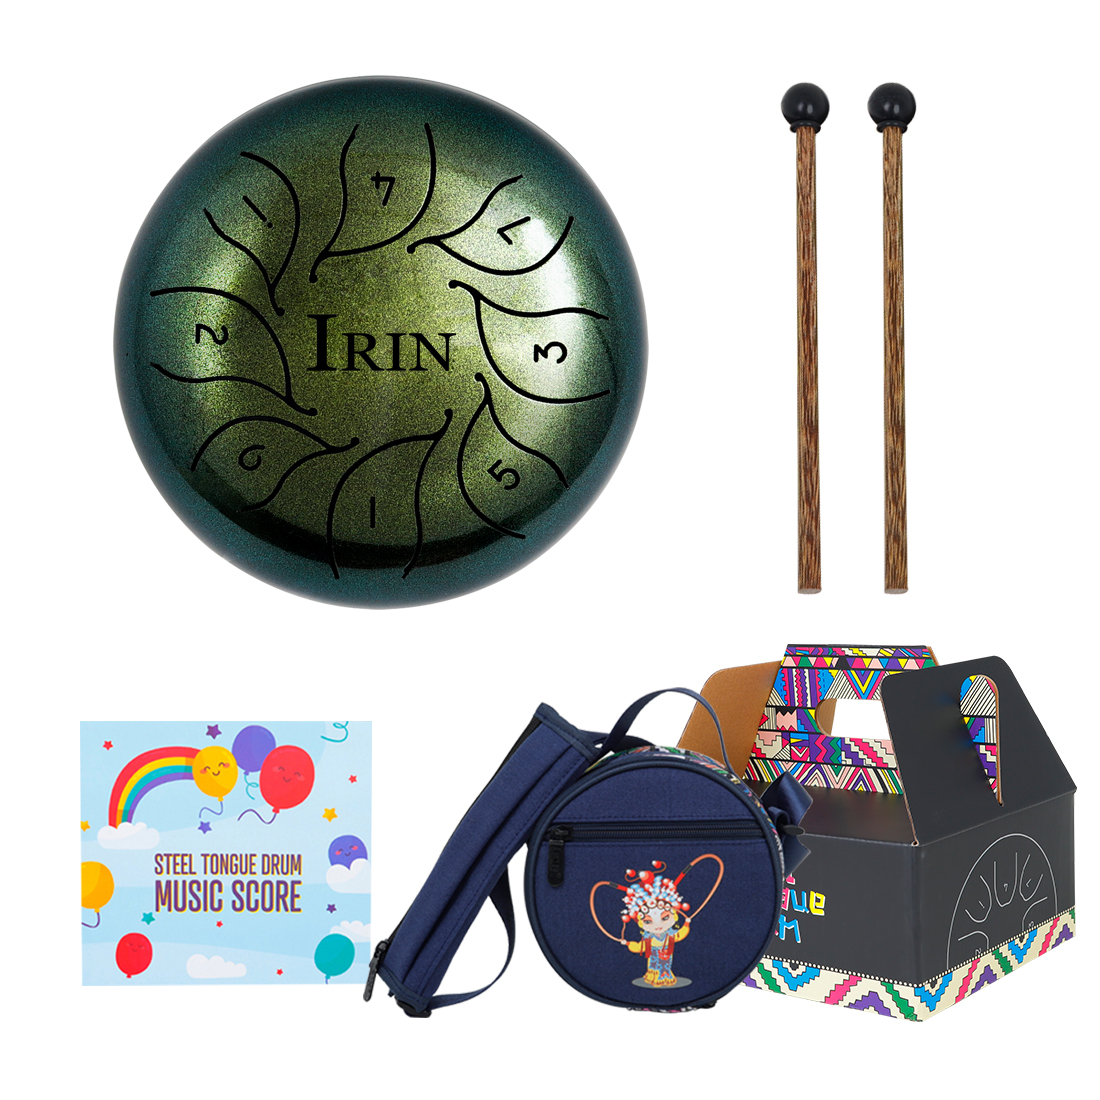 IRIN 5.5 Inch 8 Notes G Tune Steel Tongue Drum Handpan Instrument with Drum Mallets and Bag